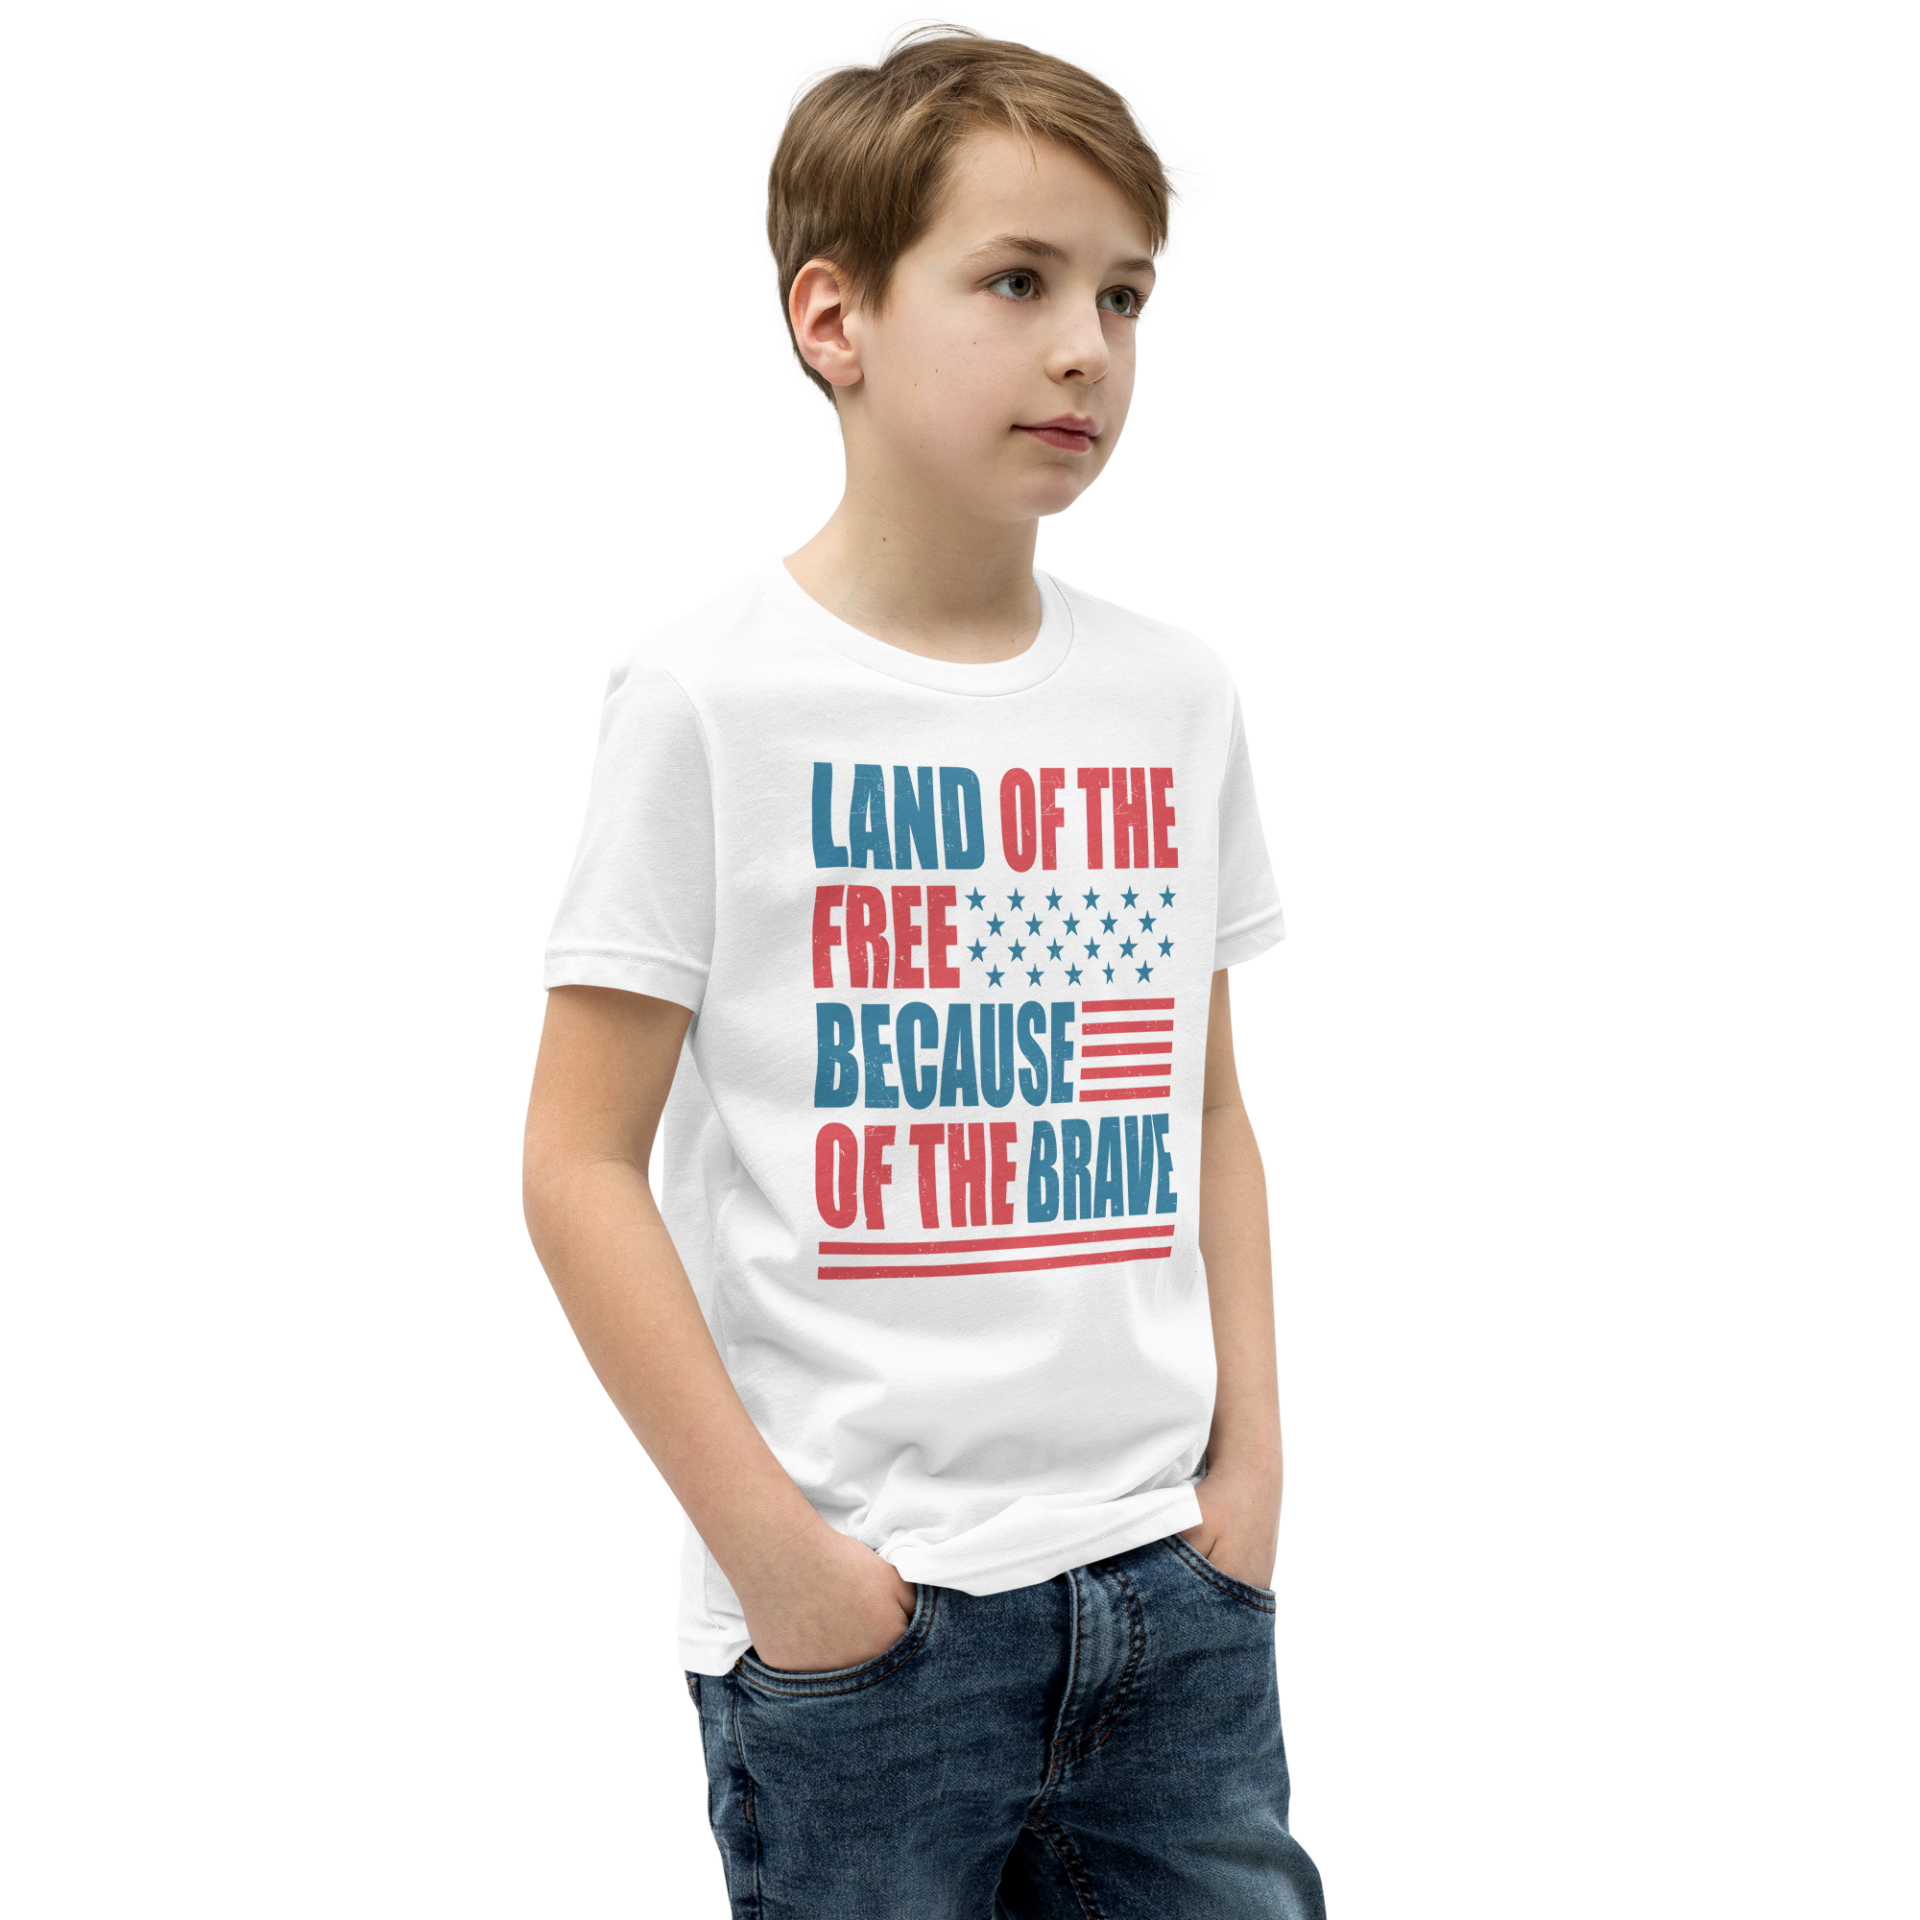 Youth T-Shirt in white with “Land of the free, because of the brave” written on it in a red and blue muted color scheme